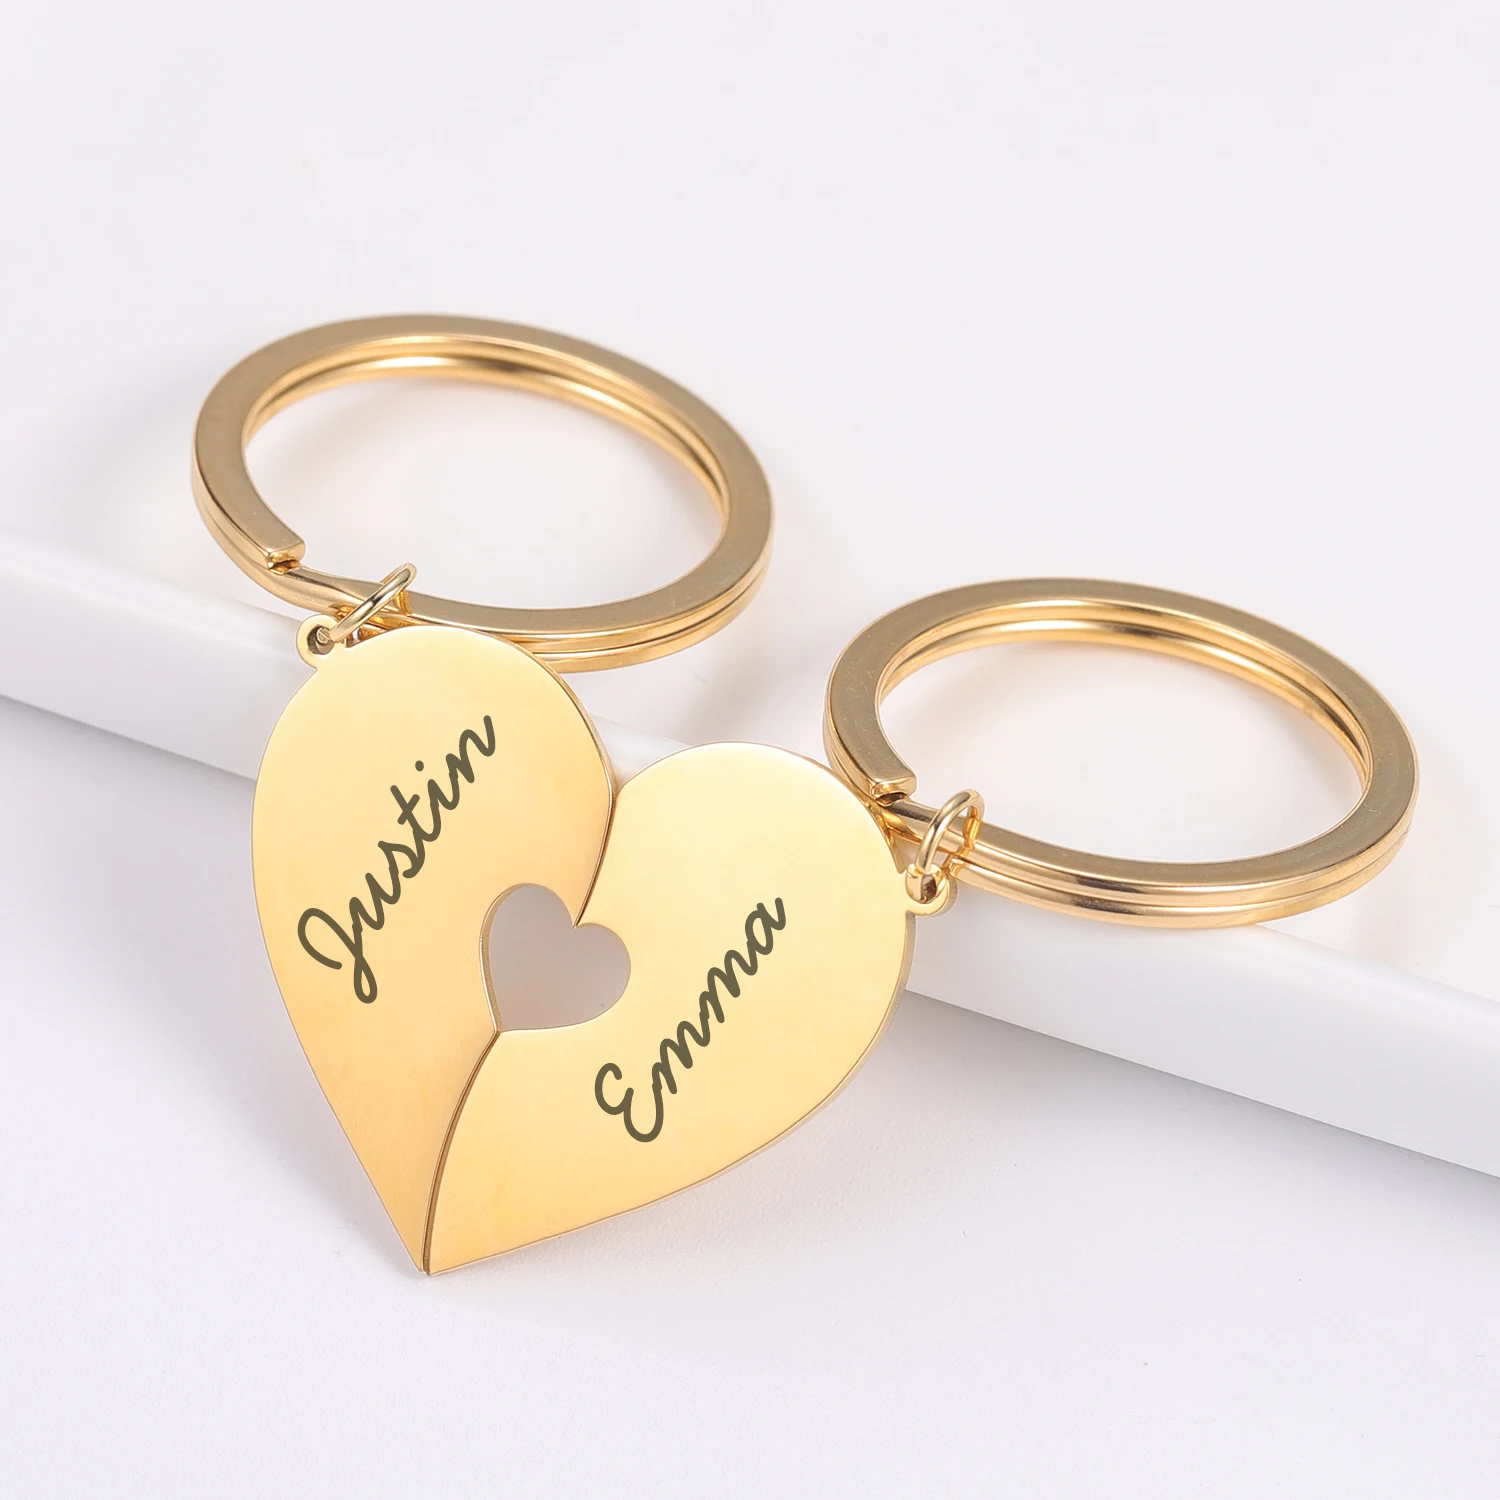 2Pcs Personalized Couples Keychain Valentine Anniversary Gift Boyfriend Girlfriend Heart KeyChain Man Women Key Chain Love Gifts metal space rose gift box mother s day wedding anniversary christmas girlfriend gift sterling silver heart birthday gift